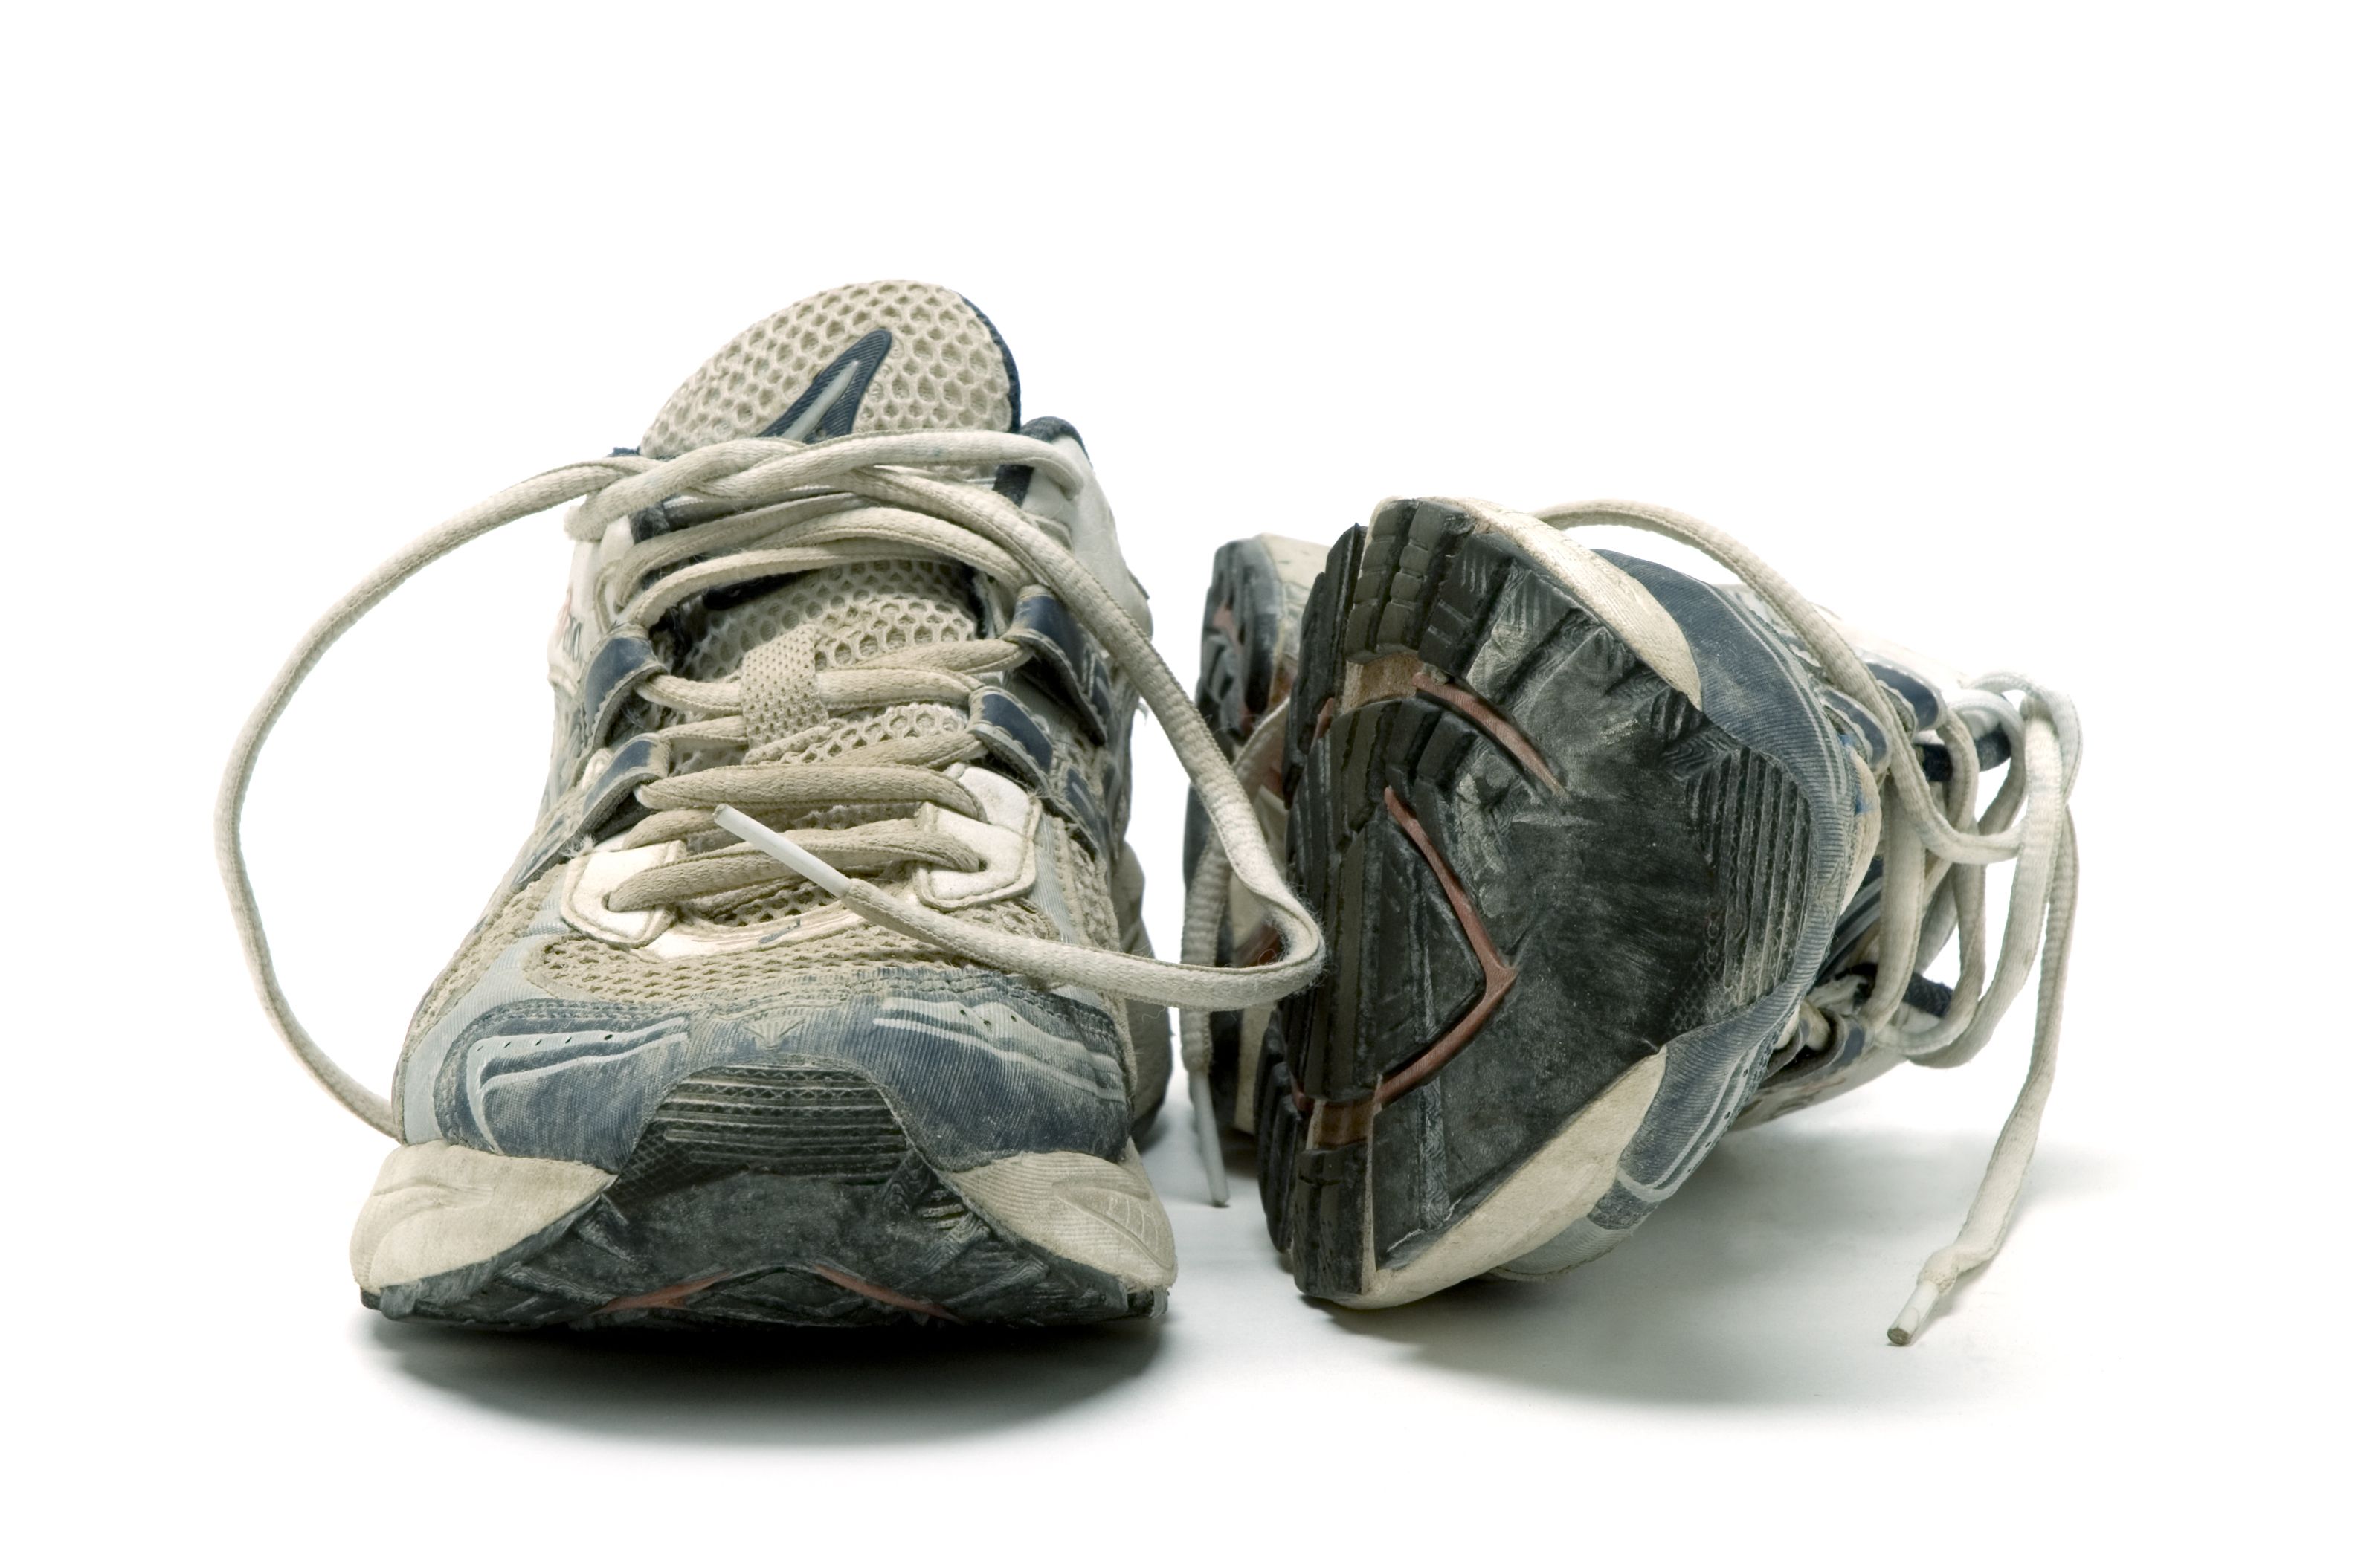 running: Time to take out your jogging shoes: Running